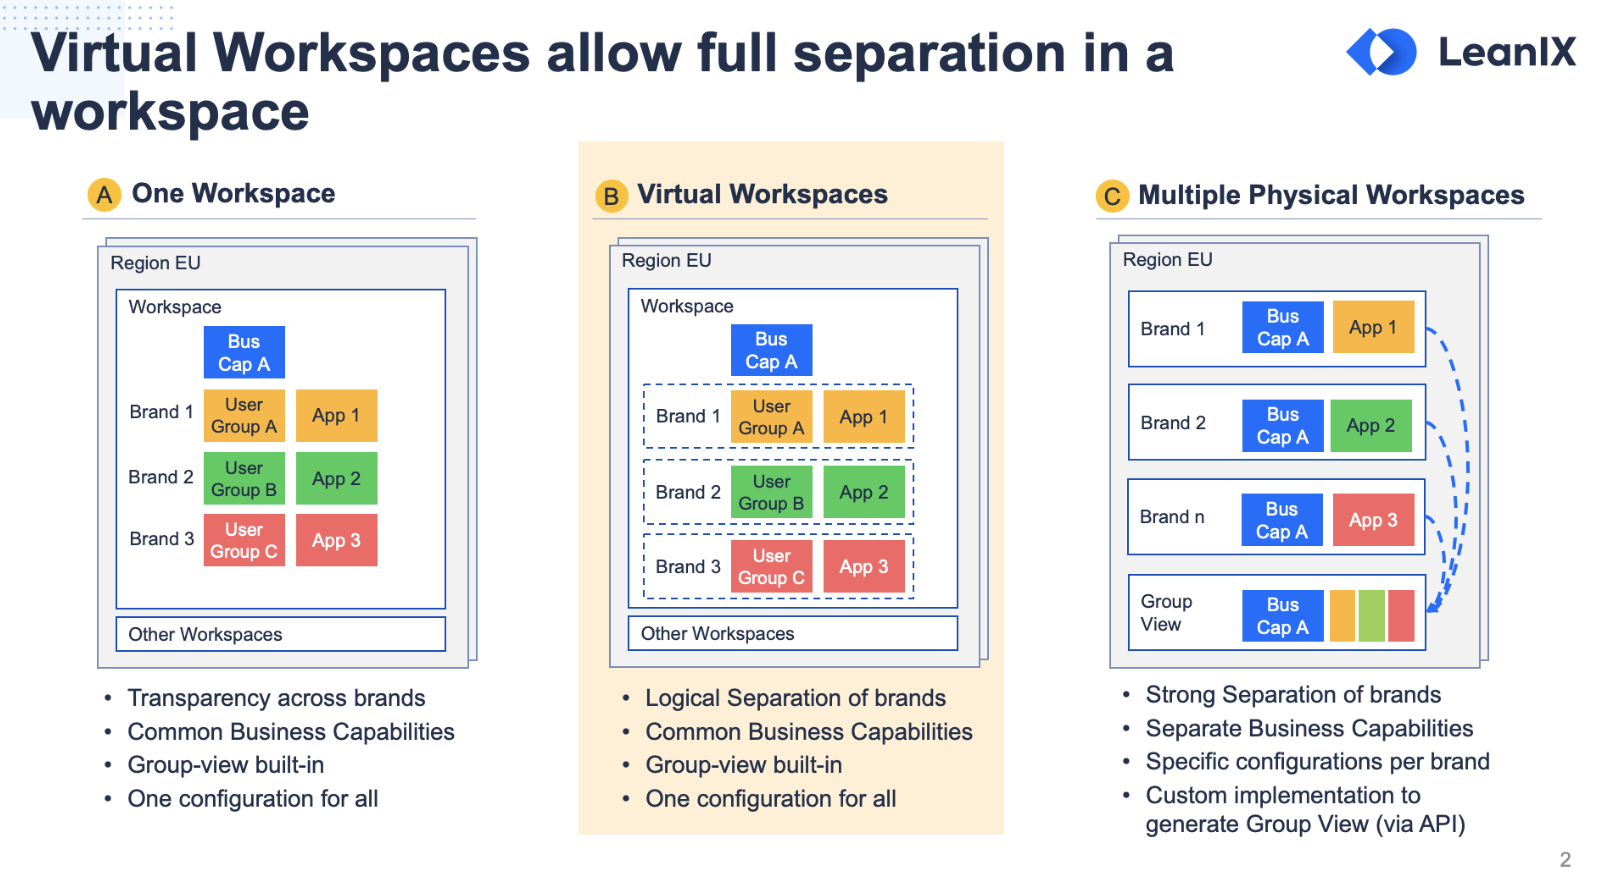 An example showing how you can segregate data by brand using Virtual Workspaces